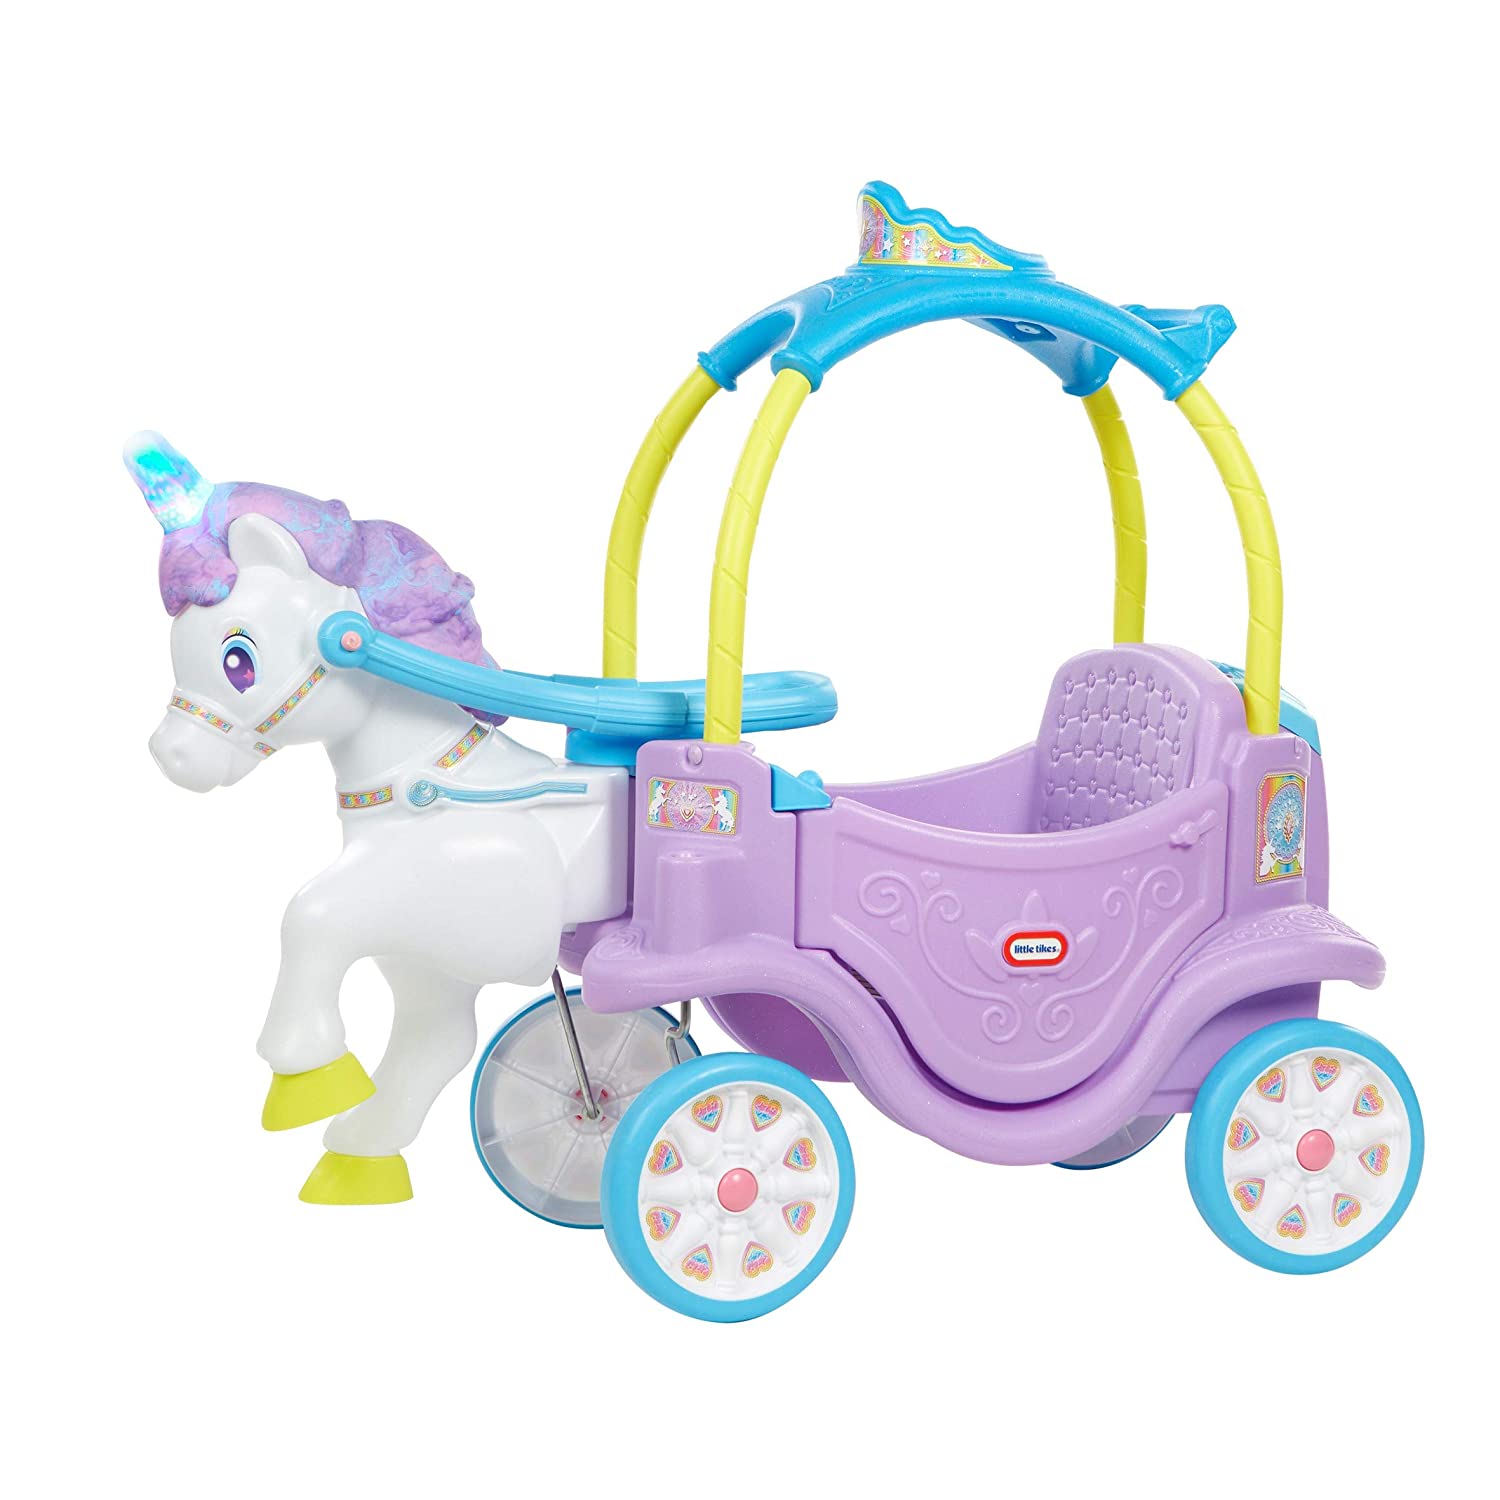 23 Best Unicorn Toys and Gifts for Girls 2022 - Review & Buying Guide 16